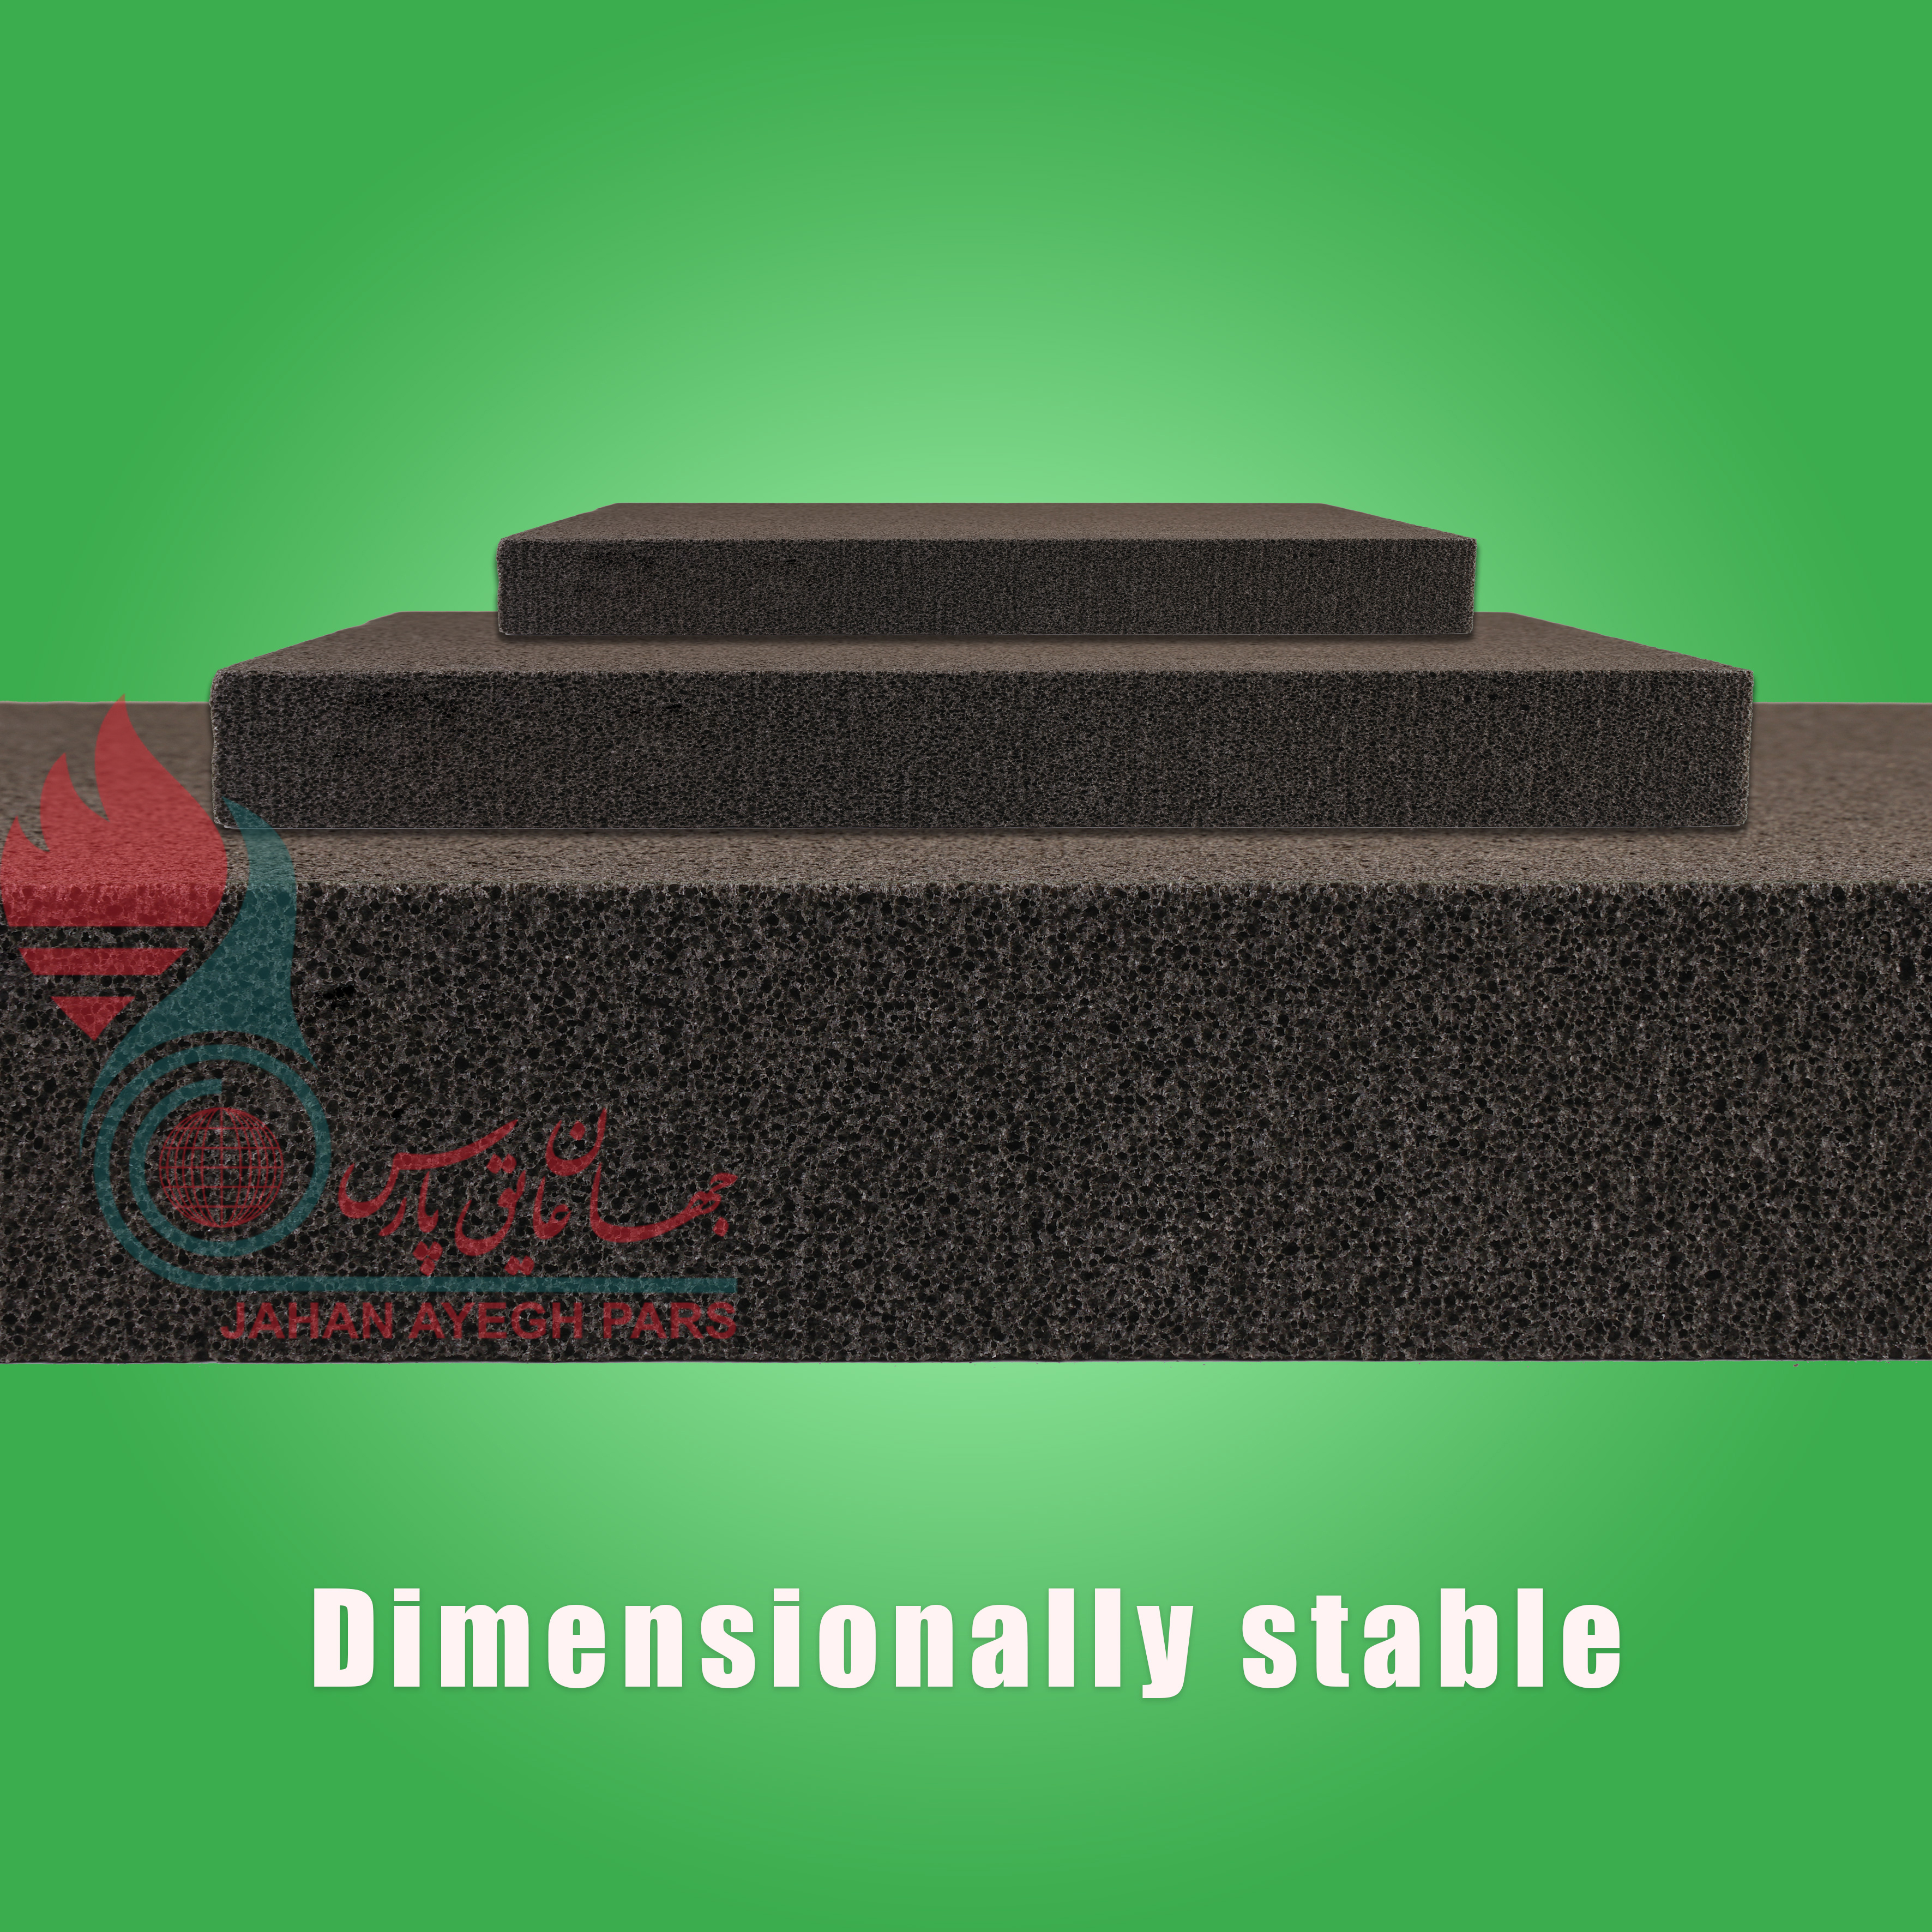 Dimensionally stable